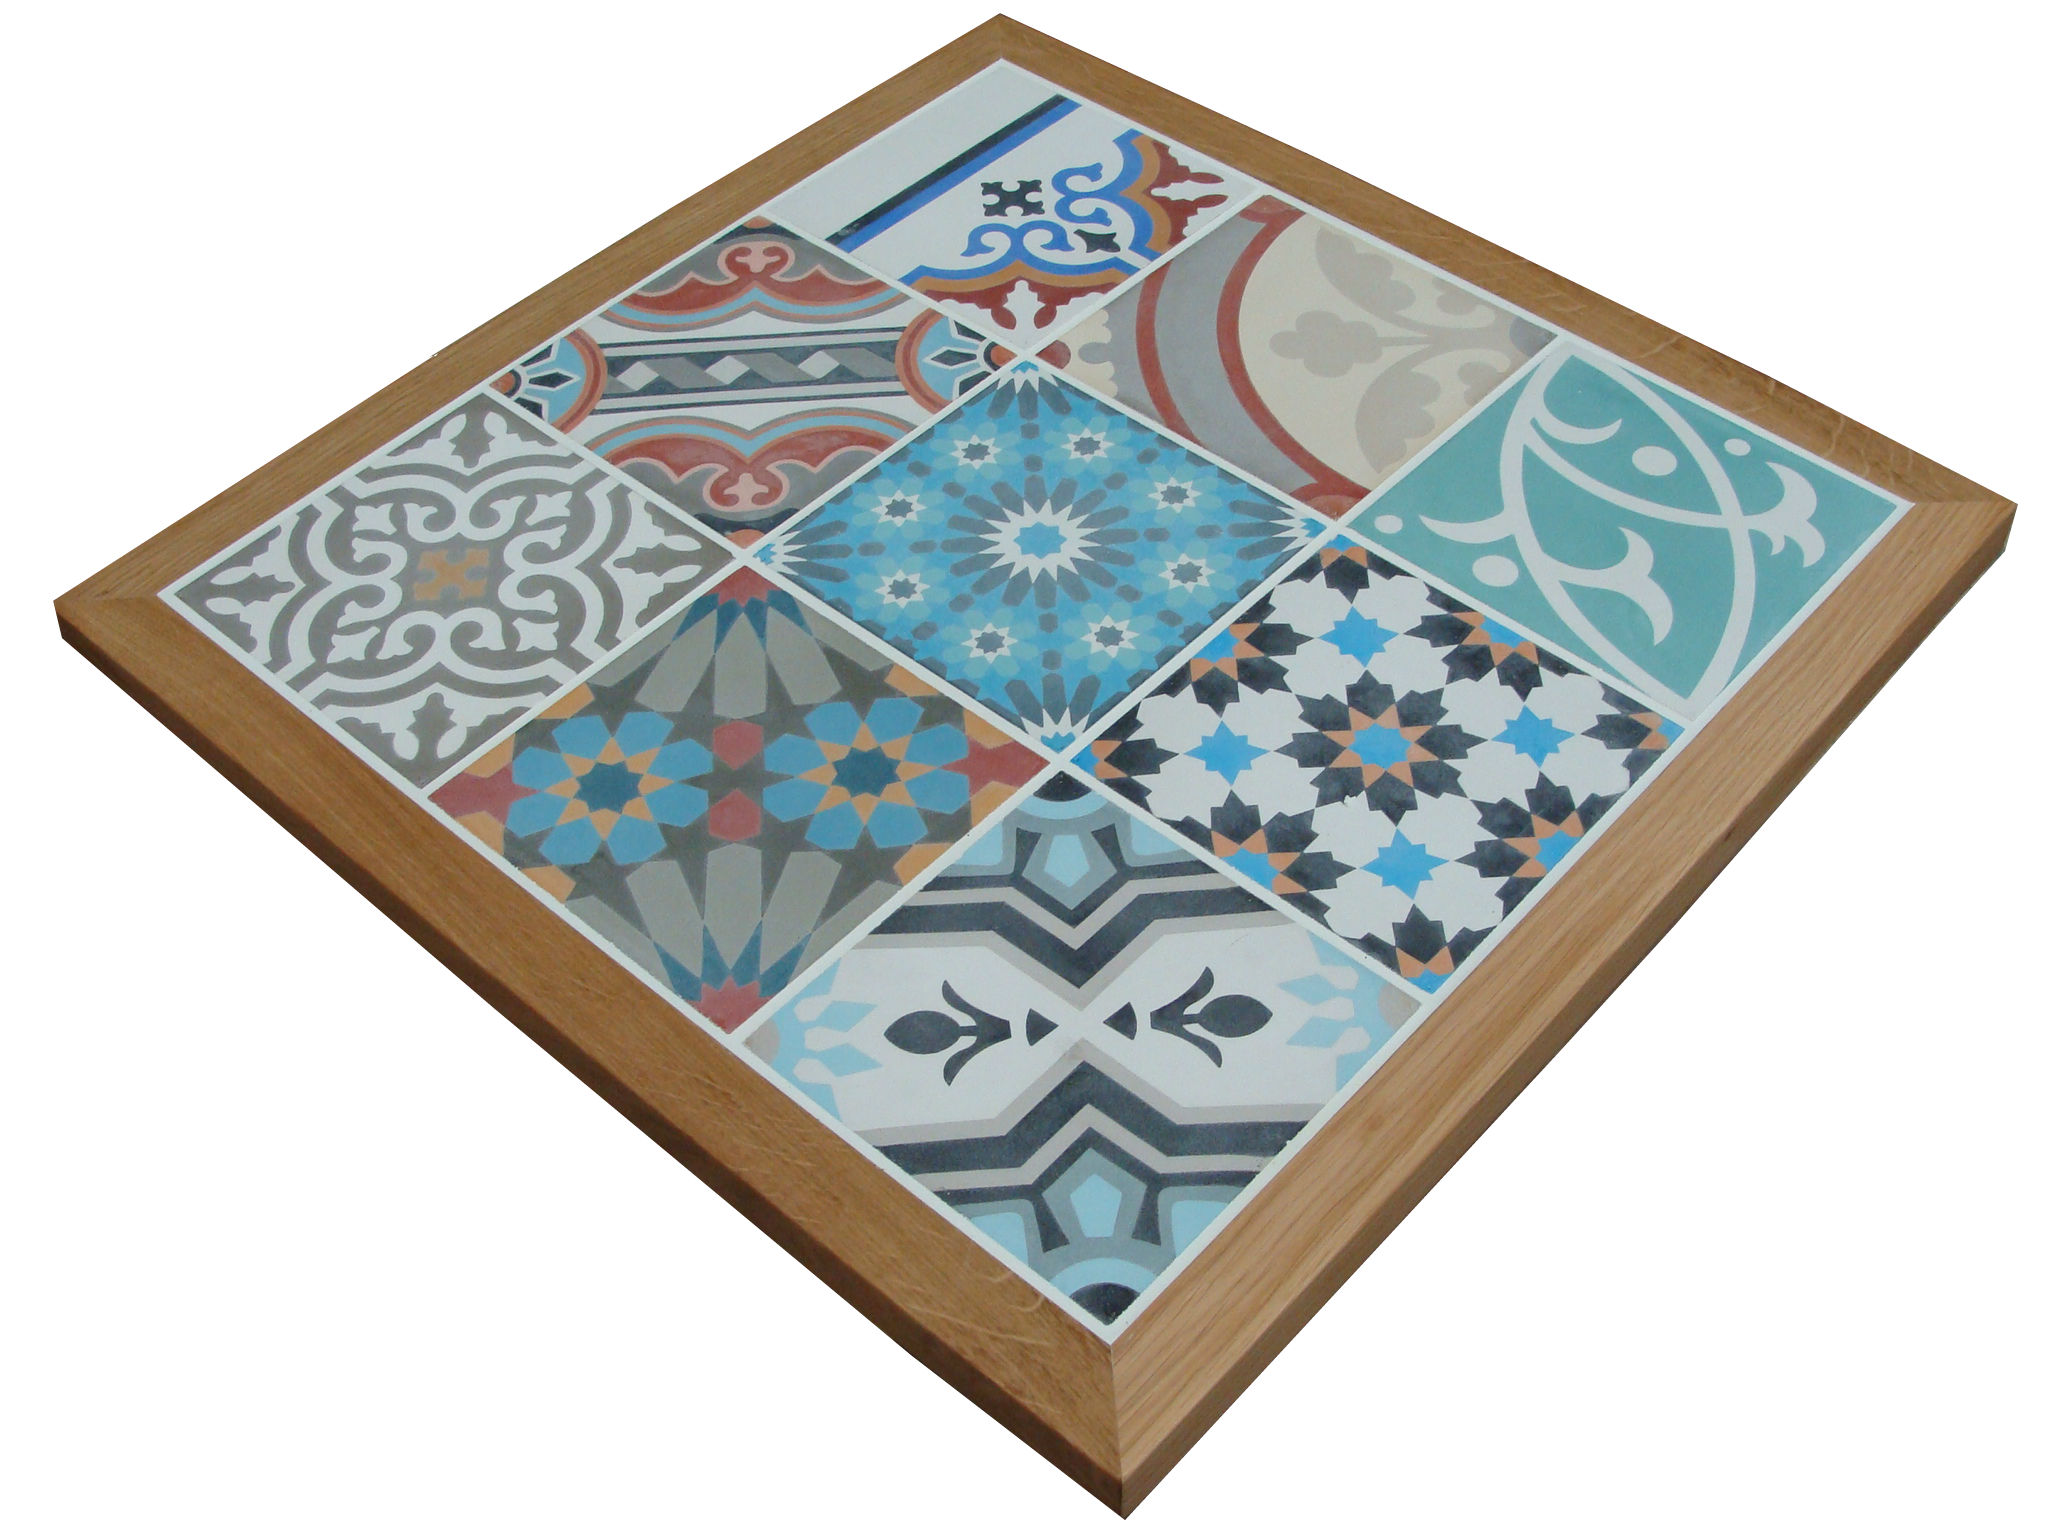 Beautiful inlaid table tops